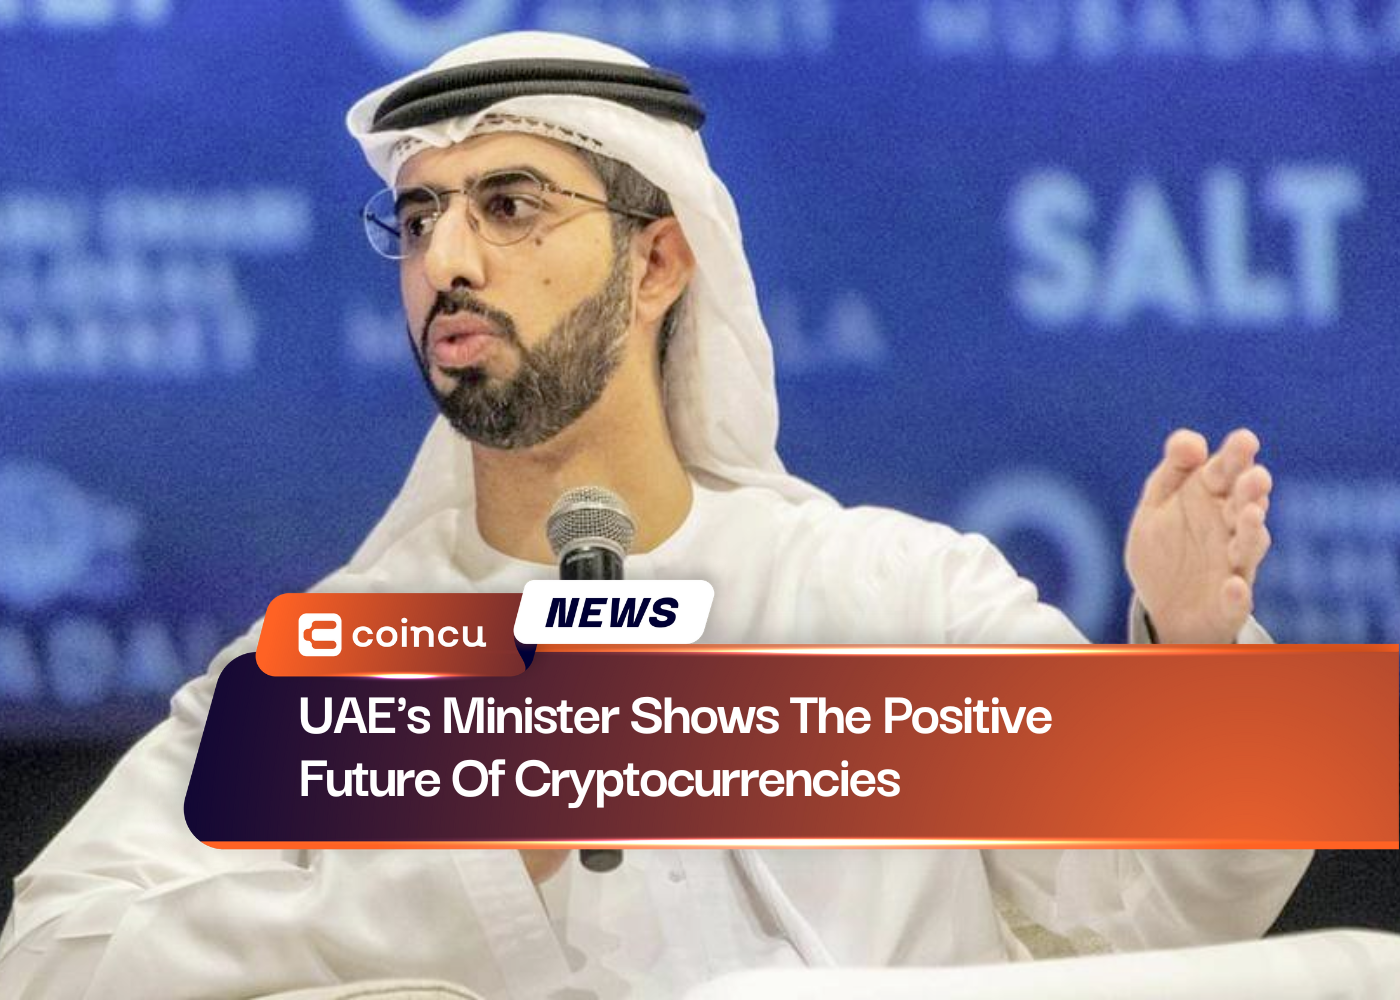 UAE's Minister Shows The Positive Future Of Cryptocurrencies